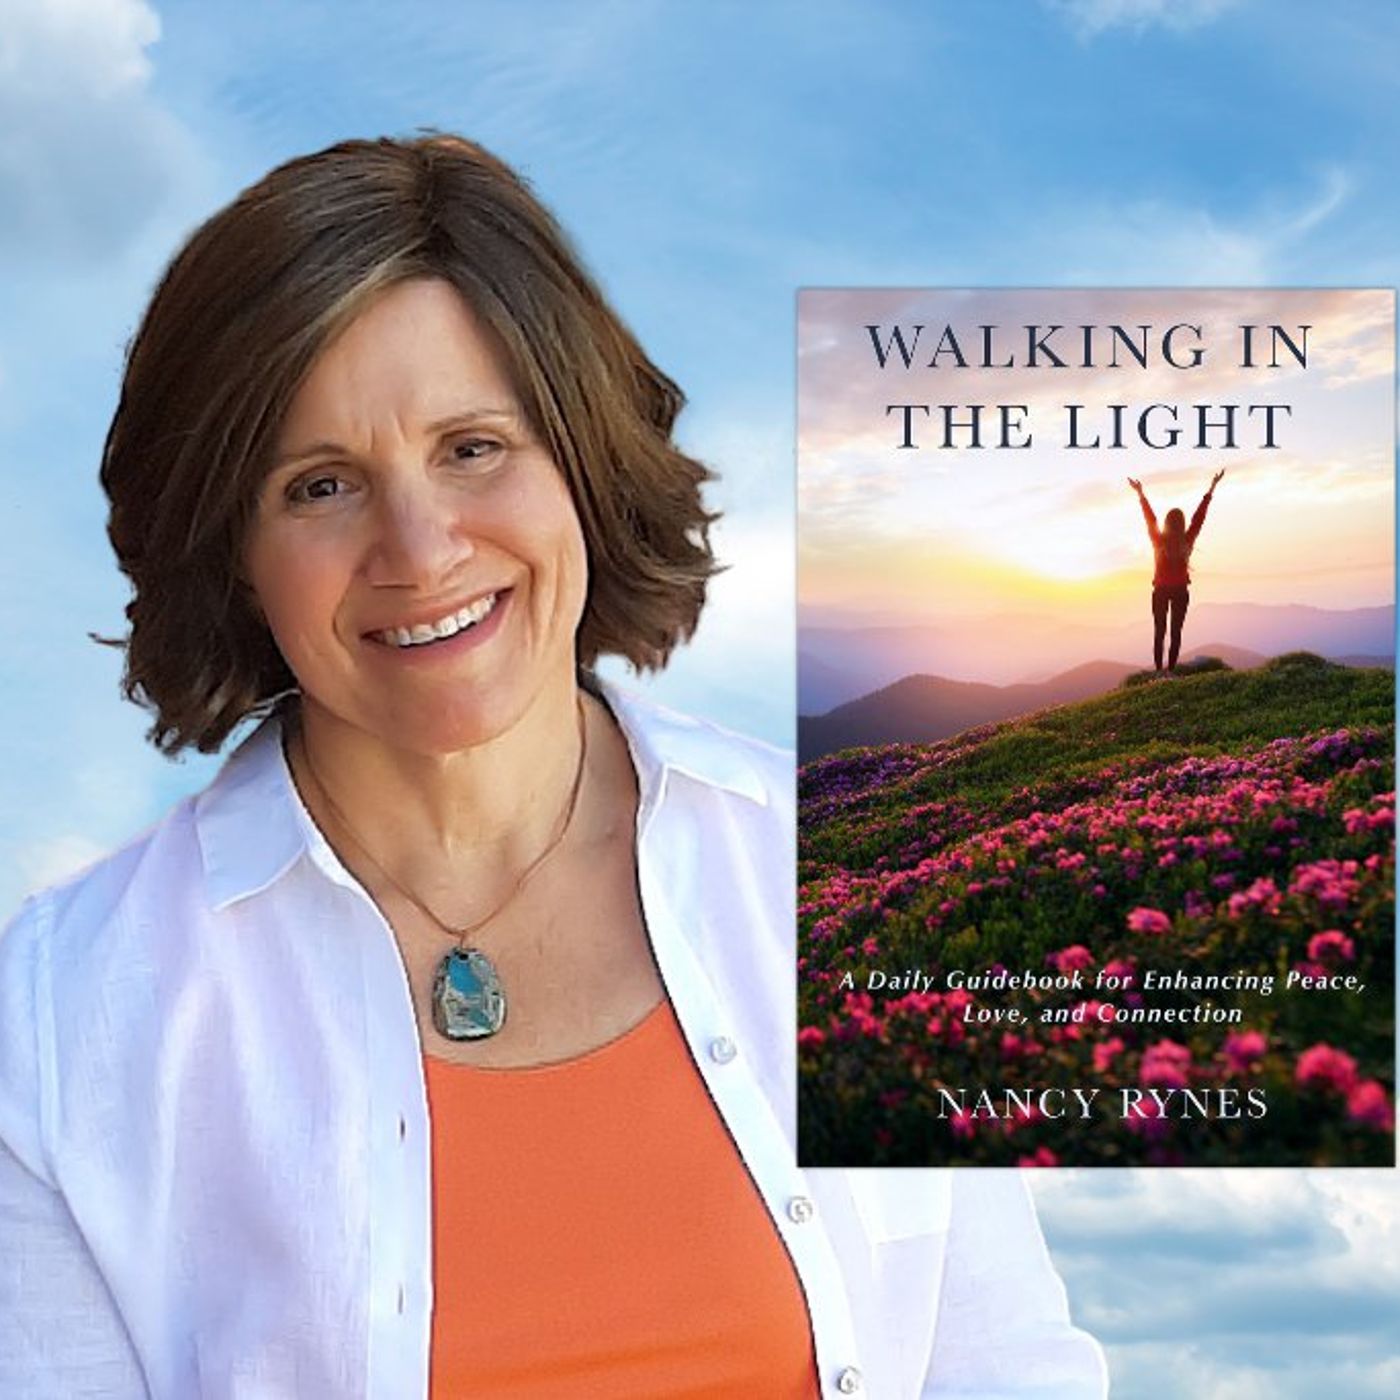 Walking in the Light with Nancy Rynes